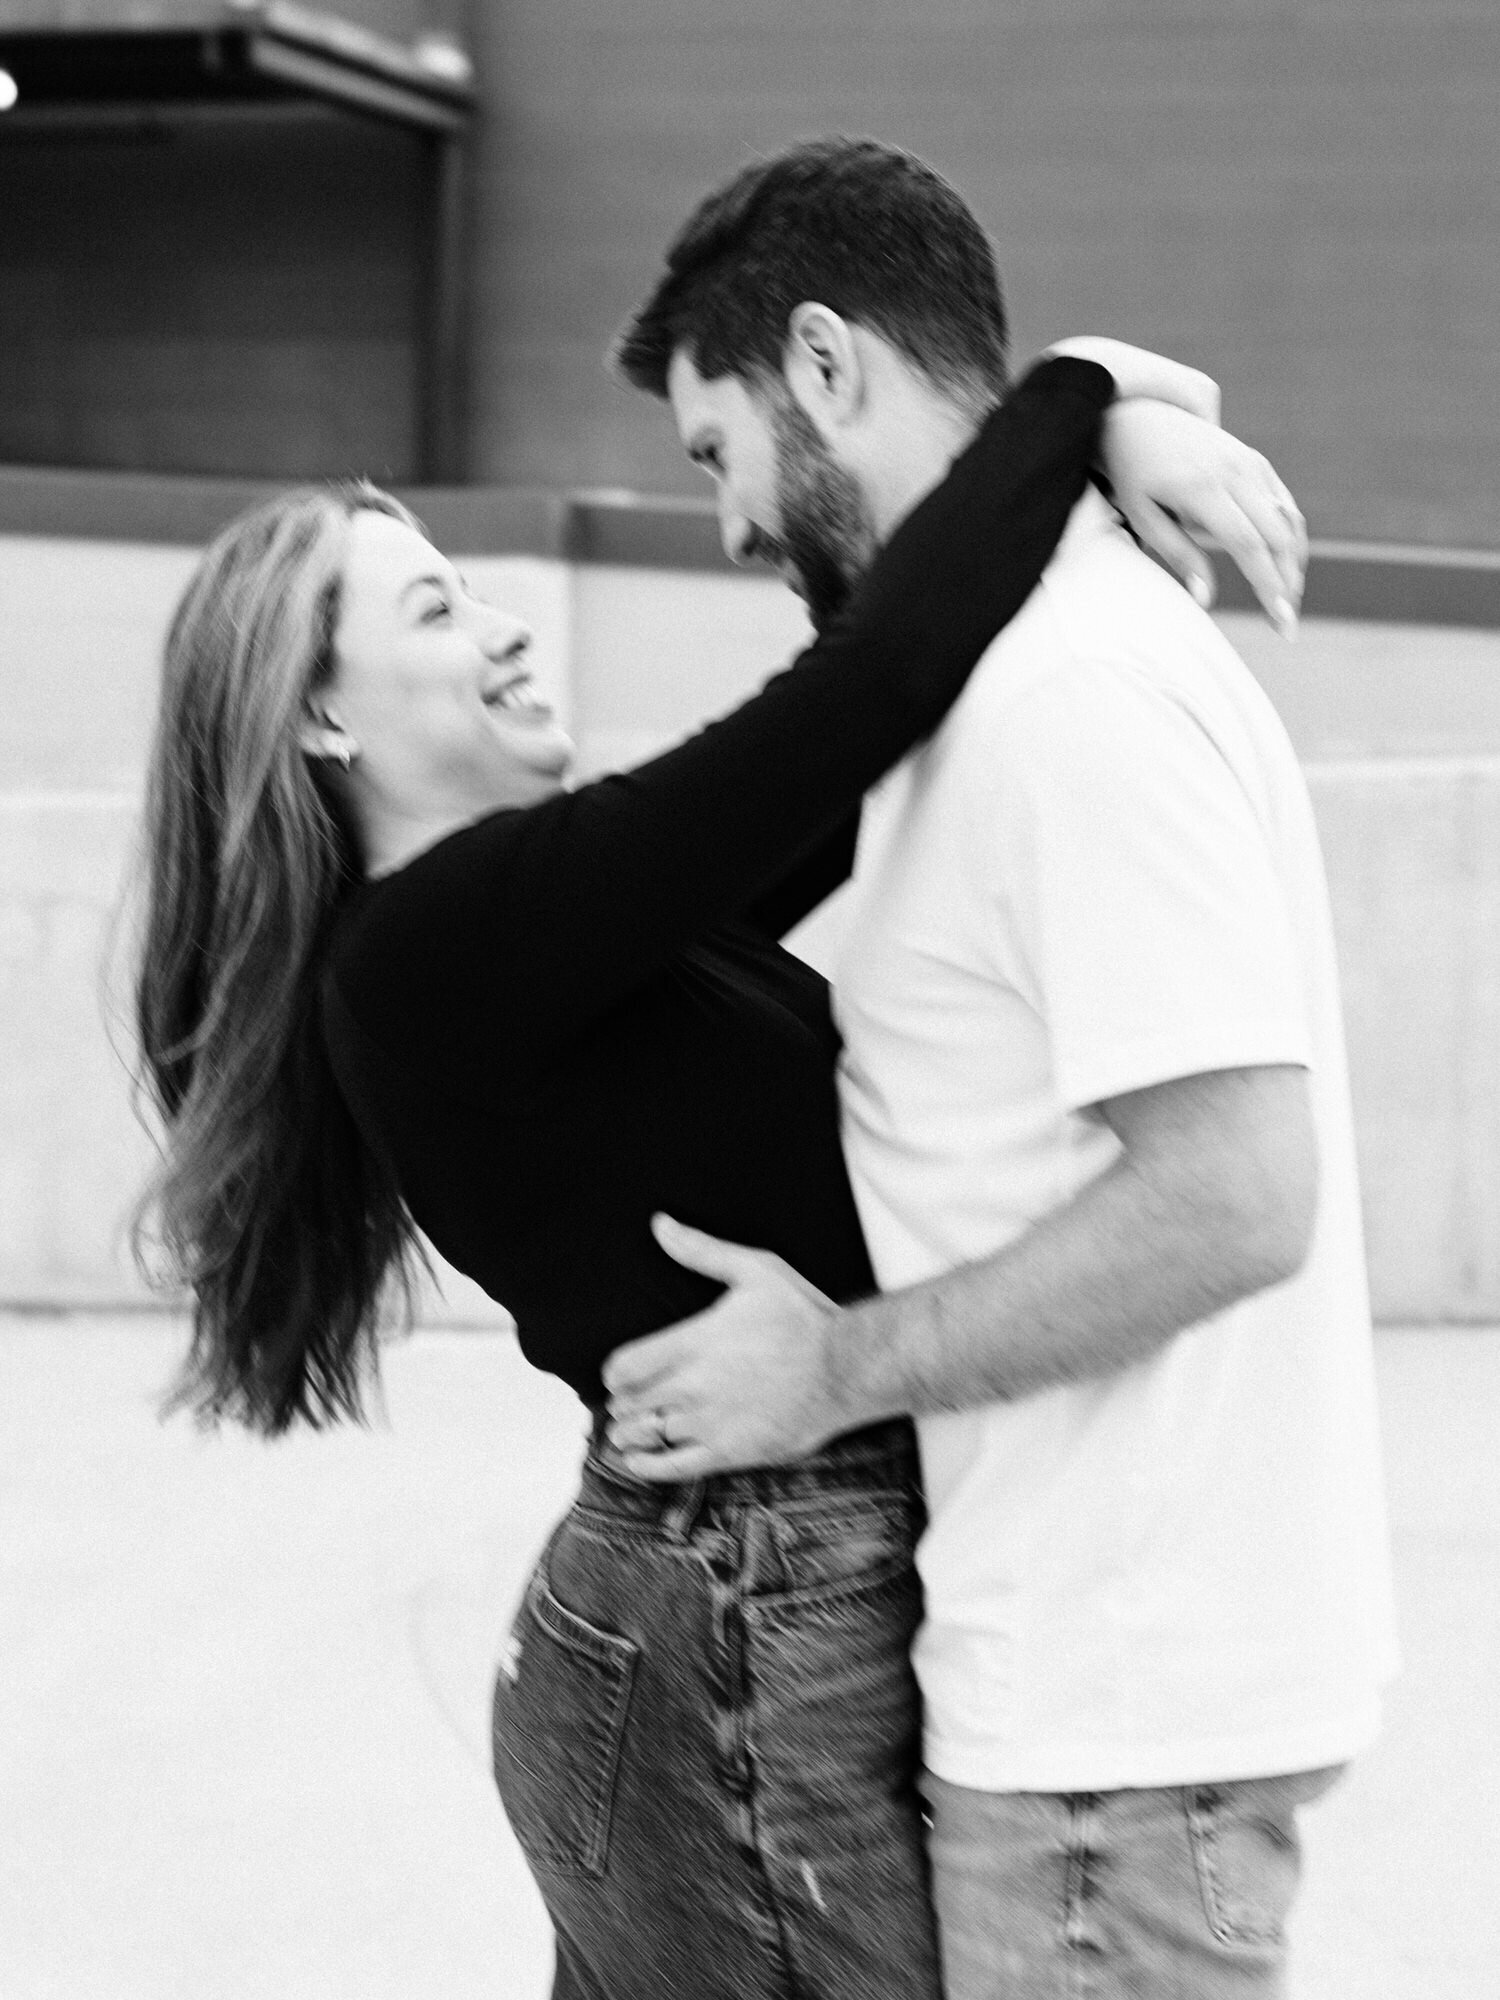 This image, taken by KD Captures, a wedding photographer in San Antonio, features a couple smiling at each other. The woman is wearing jeans and a black shirt and the man is wearing a white polo shirt and jeans. The photo is black and white, and has a motion blur effect.